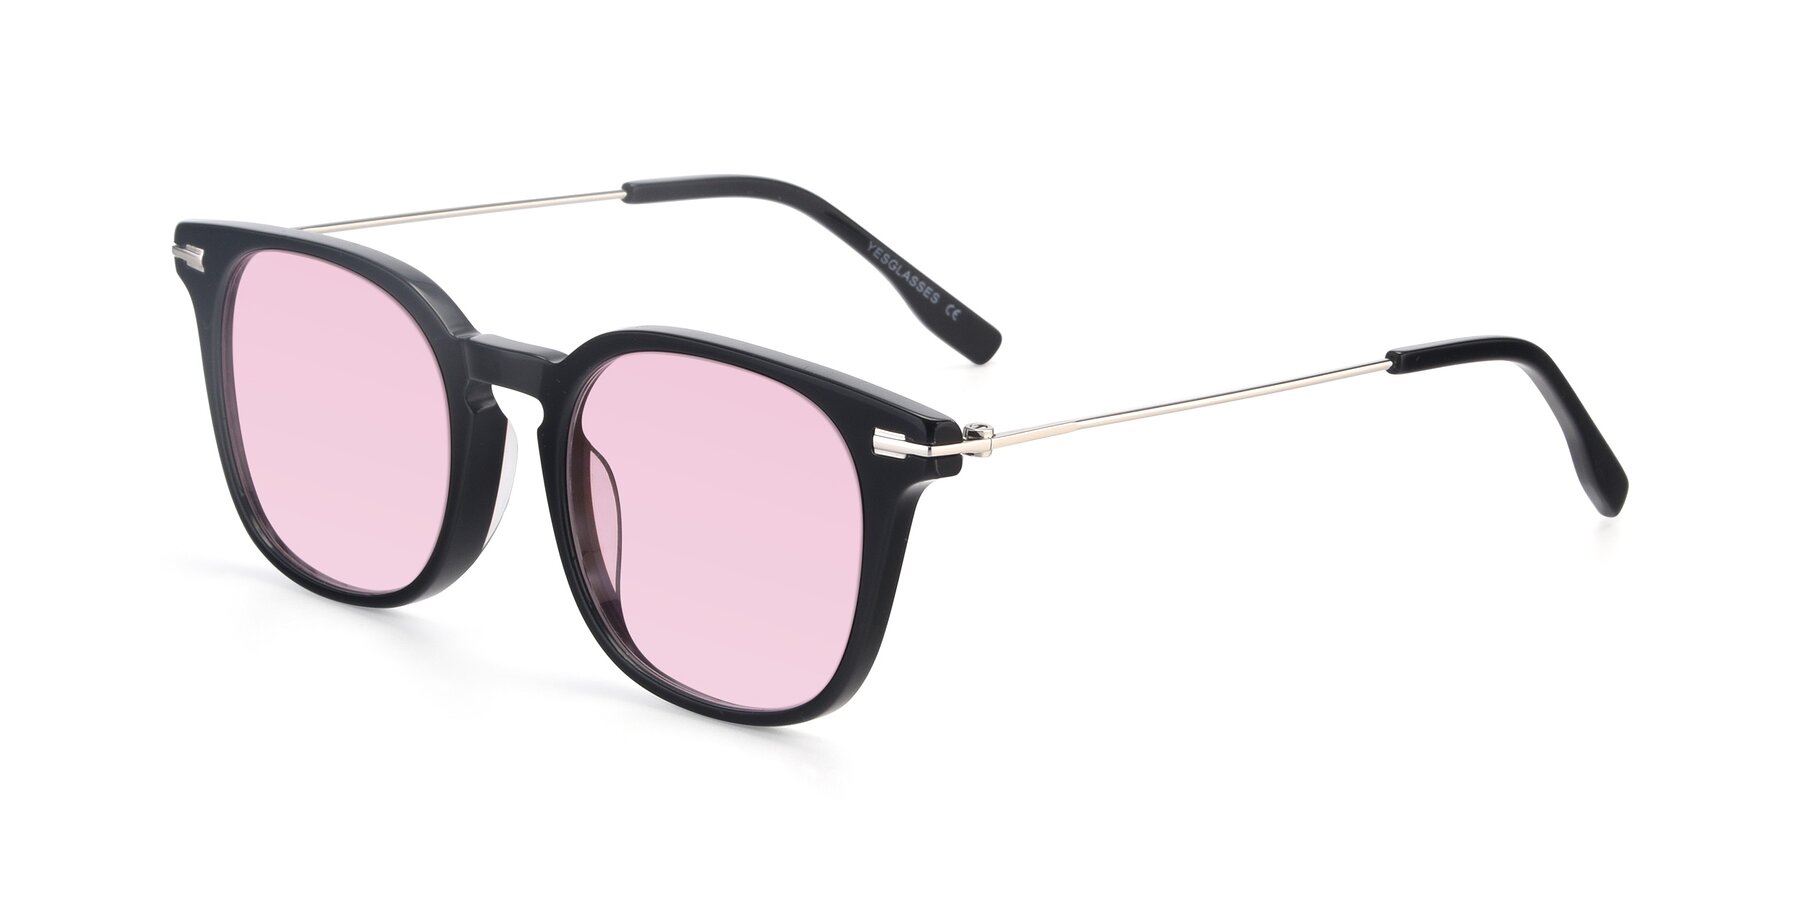 Angle of 17711 in Black with Light Pink Tinted Lenses